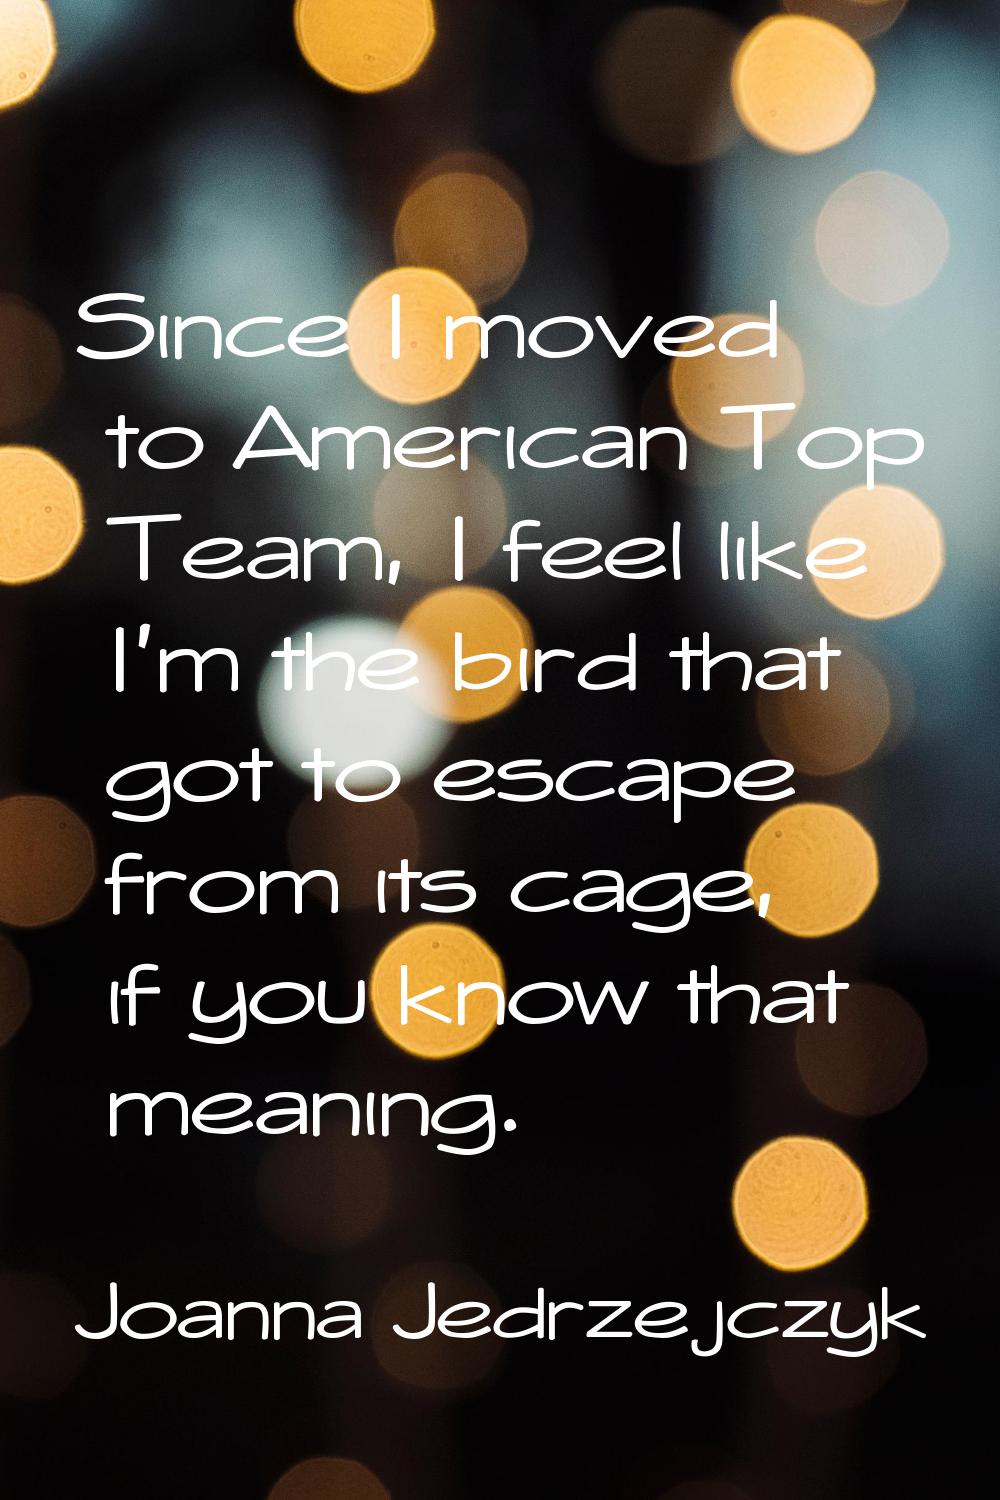 Since I moved to American Top Team, I feel like I'm the bird that got to escape from its cage, if y